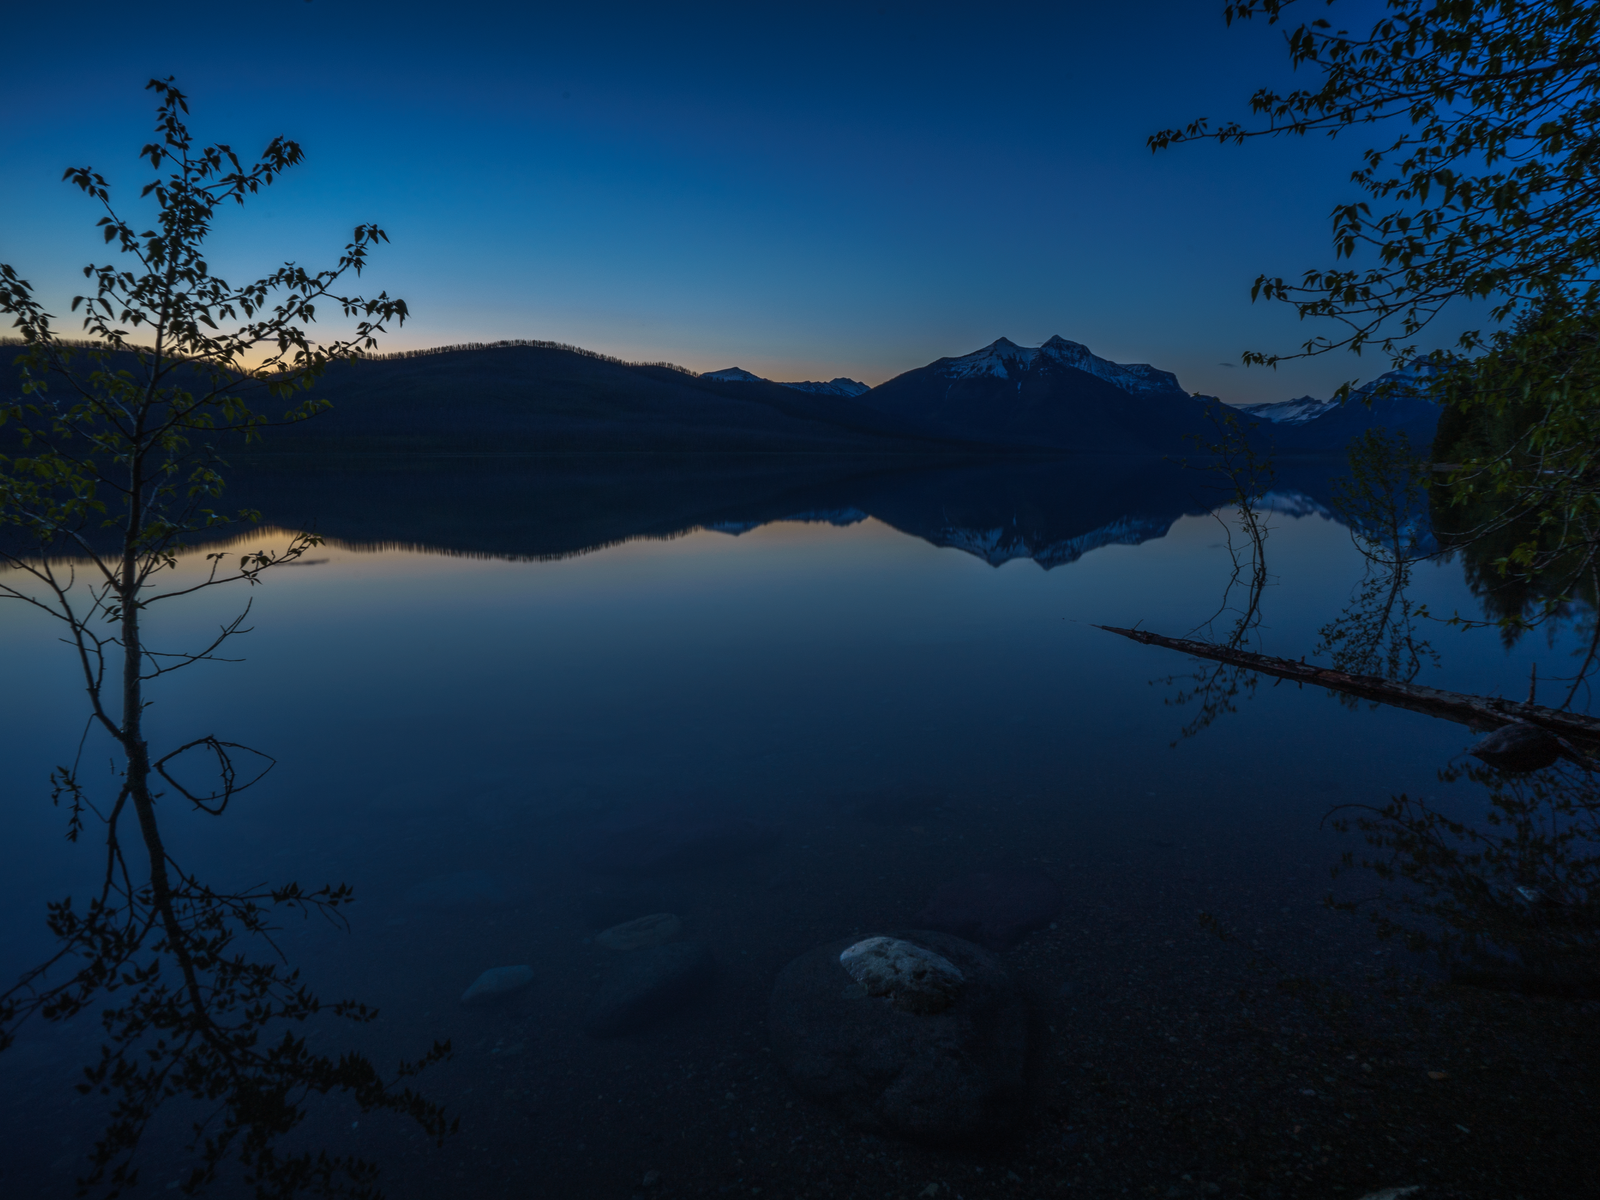 A tranquil night at Lake MacDonald, one of the best things to do in Montana, where the surrounding mountains of Glacier National Park are reflected on the still water